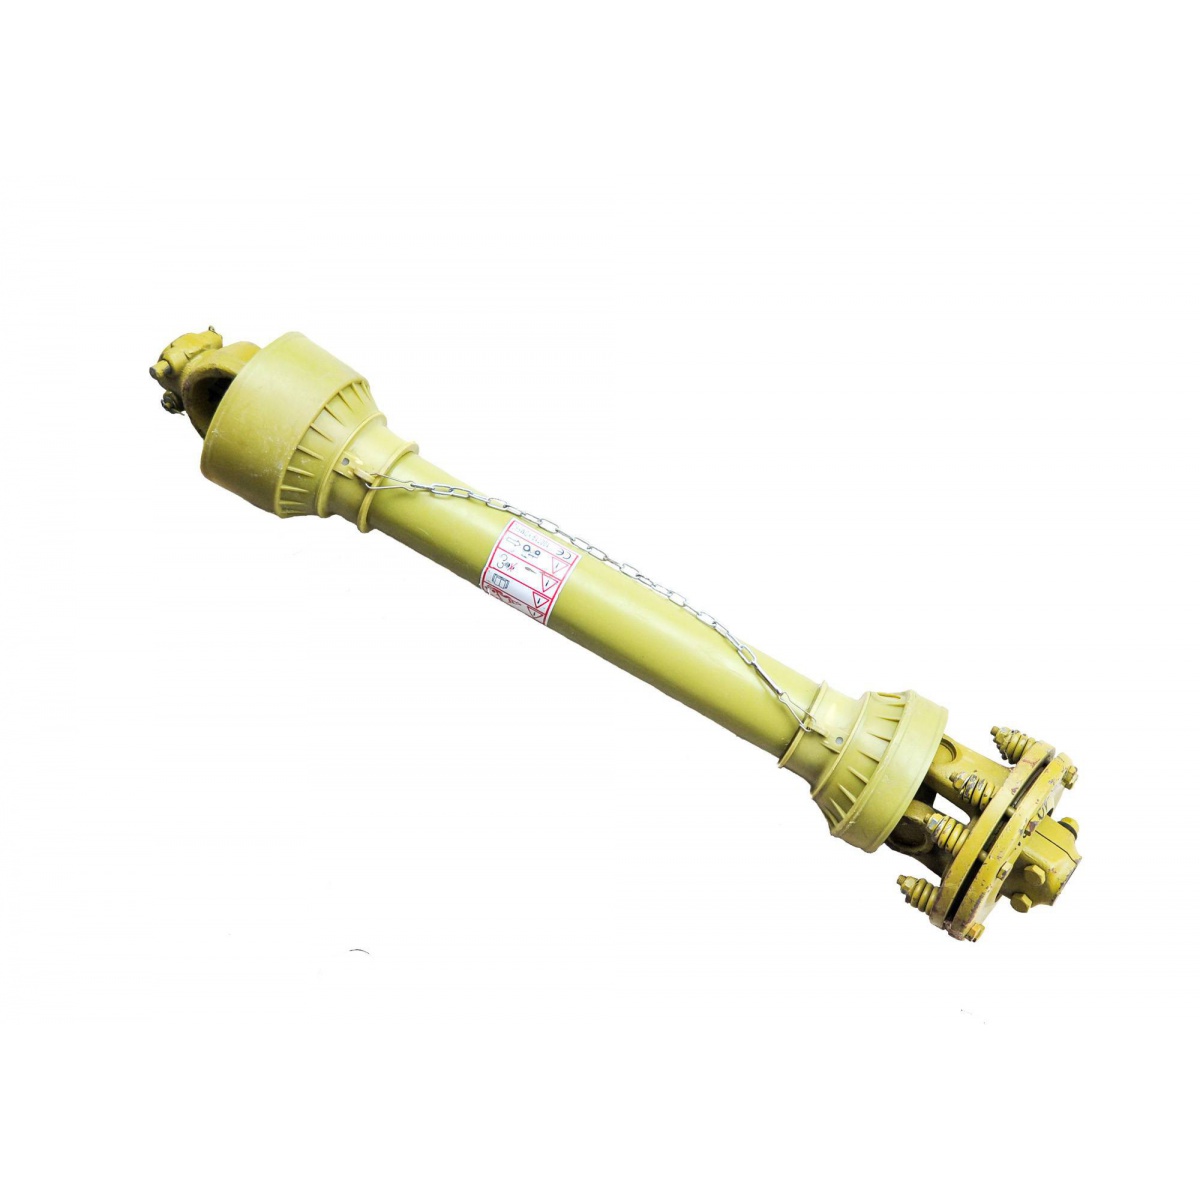 PTO shaft with clutch 07B - 70 cm / up to 105 HP